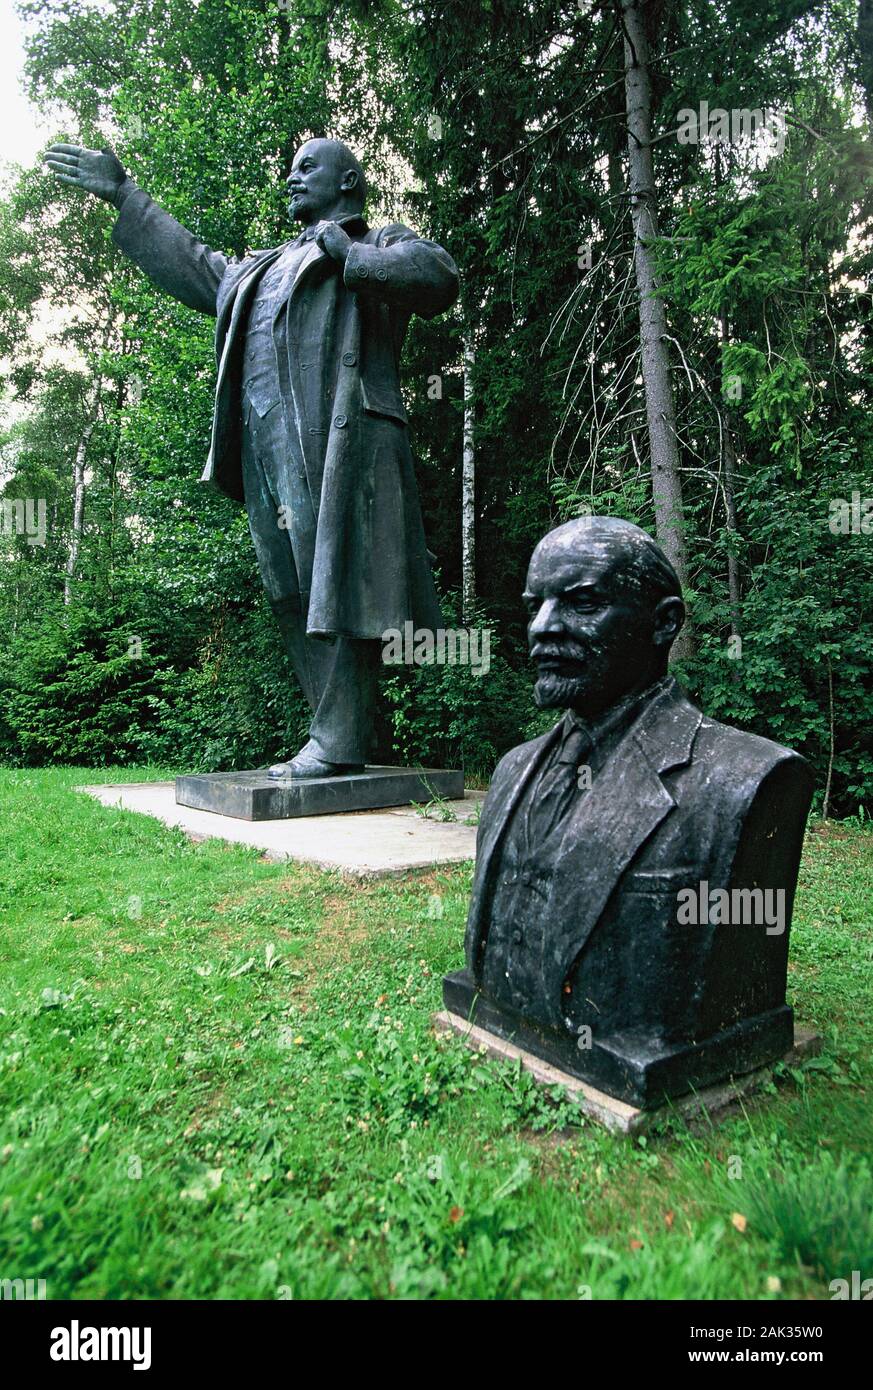 View of two sculptures (Lenin and Stalin) in the open-air-museum Gruto  Parkas near Druskininkai, Lithuania. (Undated picture) | usage worldwide  Stock Photo - Alamy